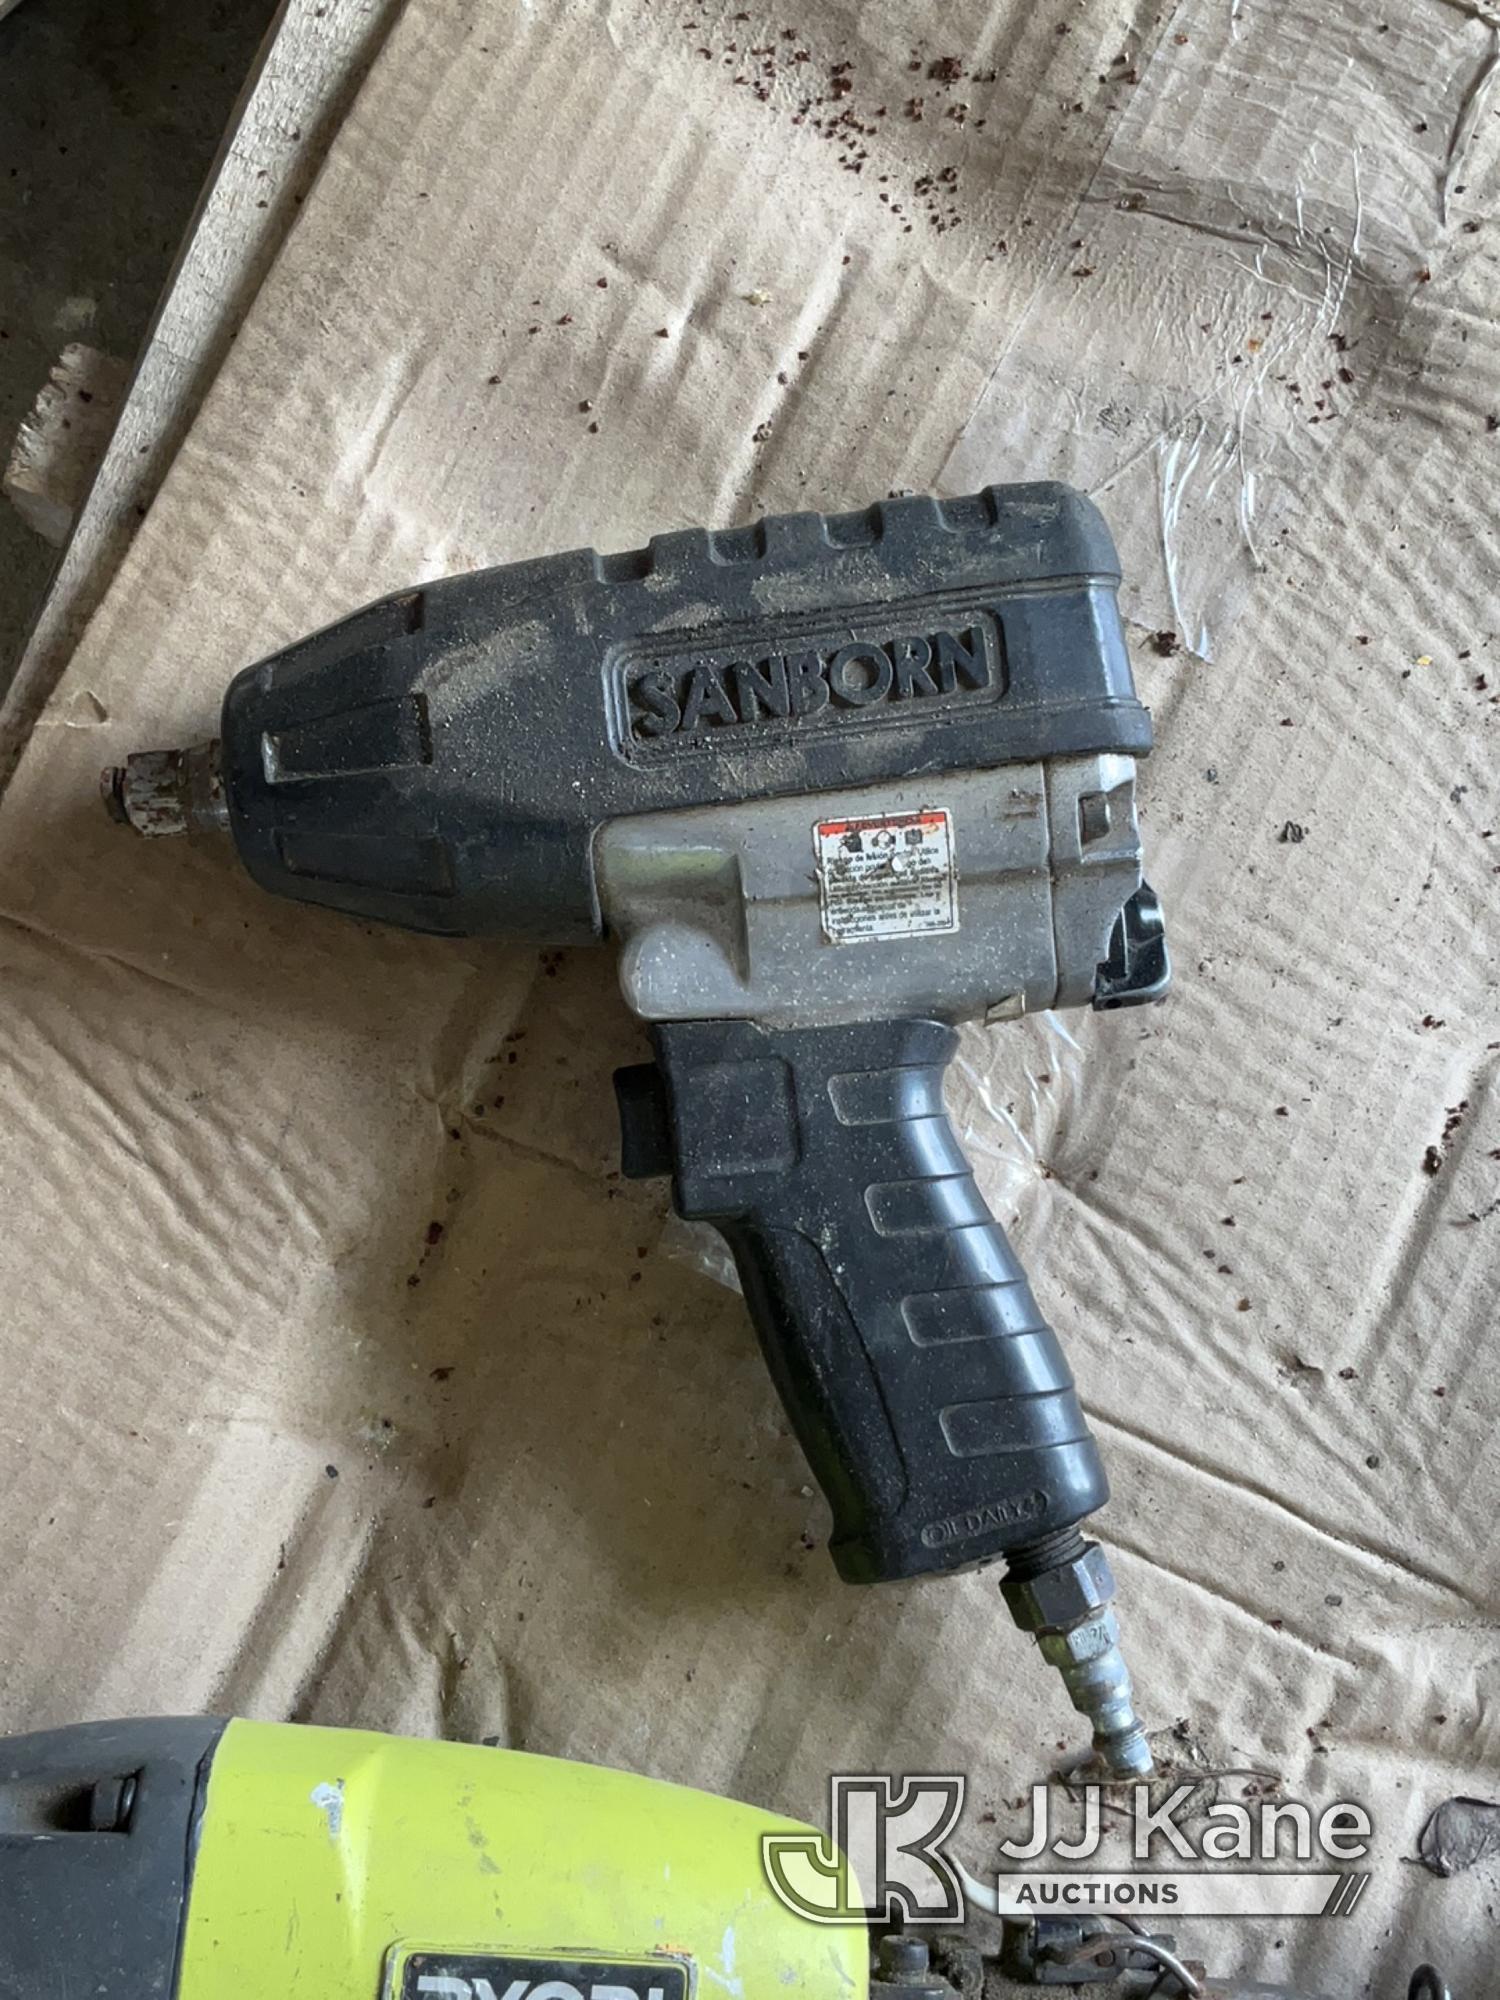 (South Beloit, IL) Miscellaneous Pneumatic Tools (Conditions Unknown) NOTE: This unit is being sold